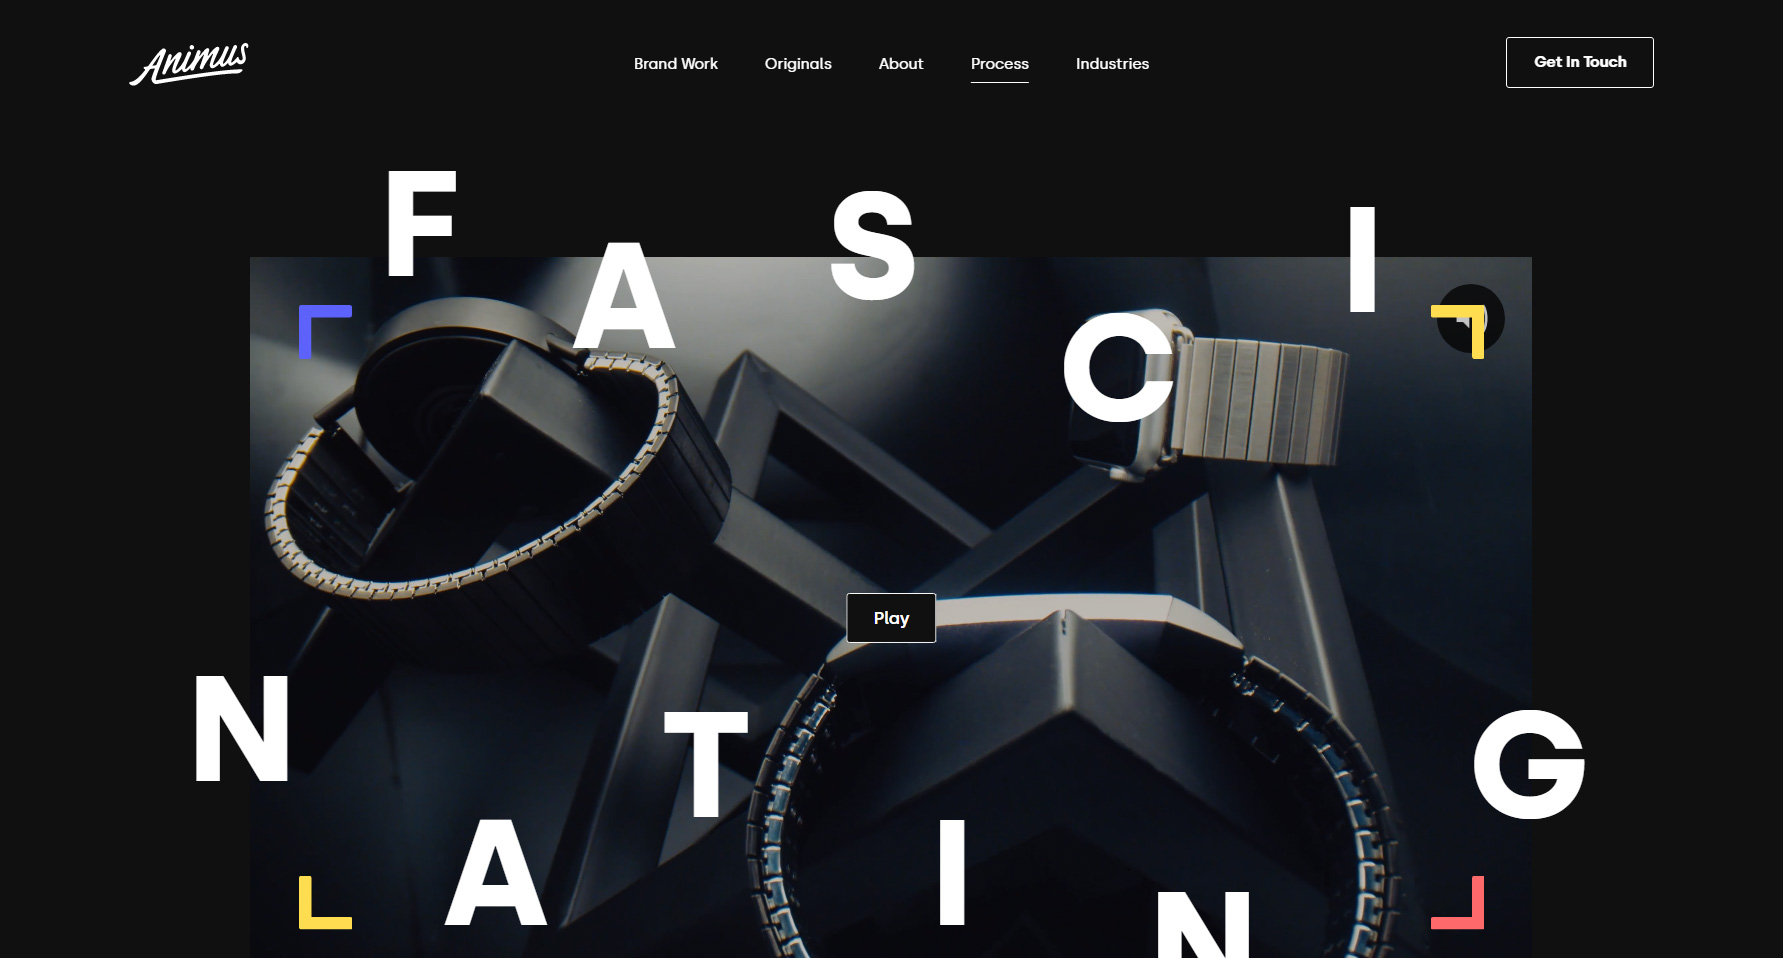 Animus - Website of the Day